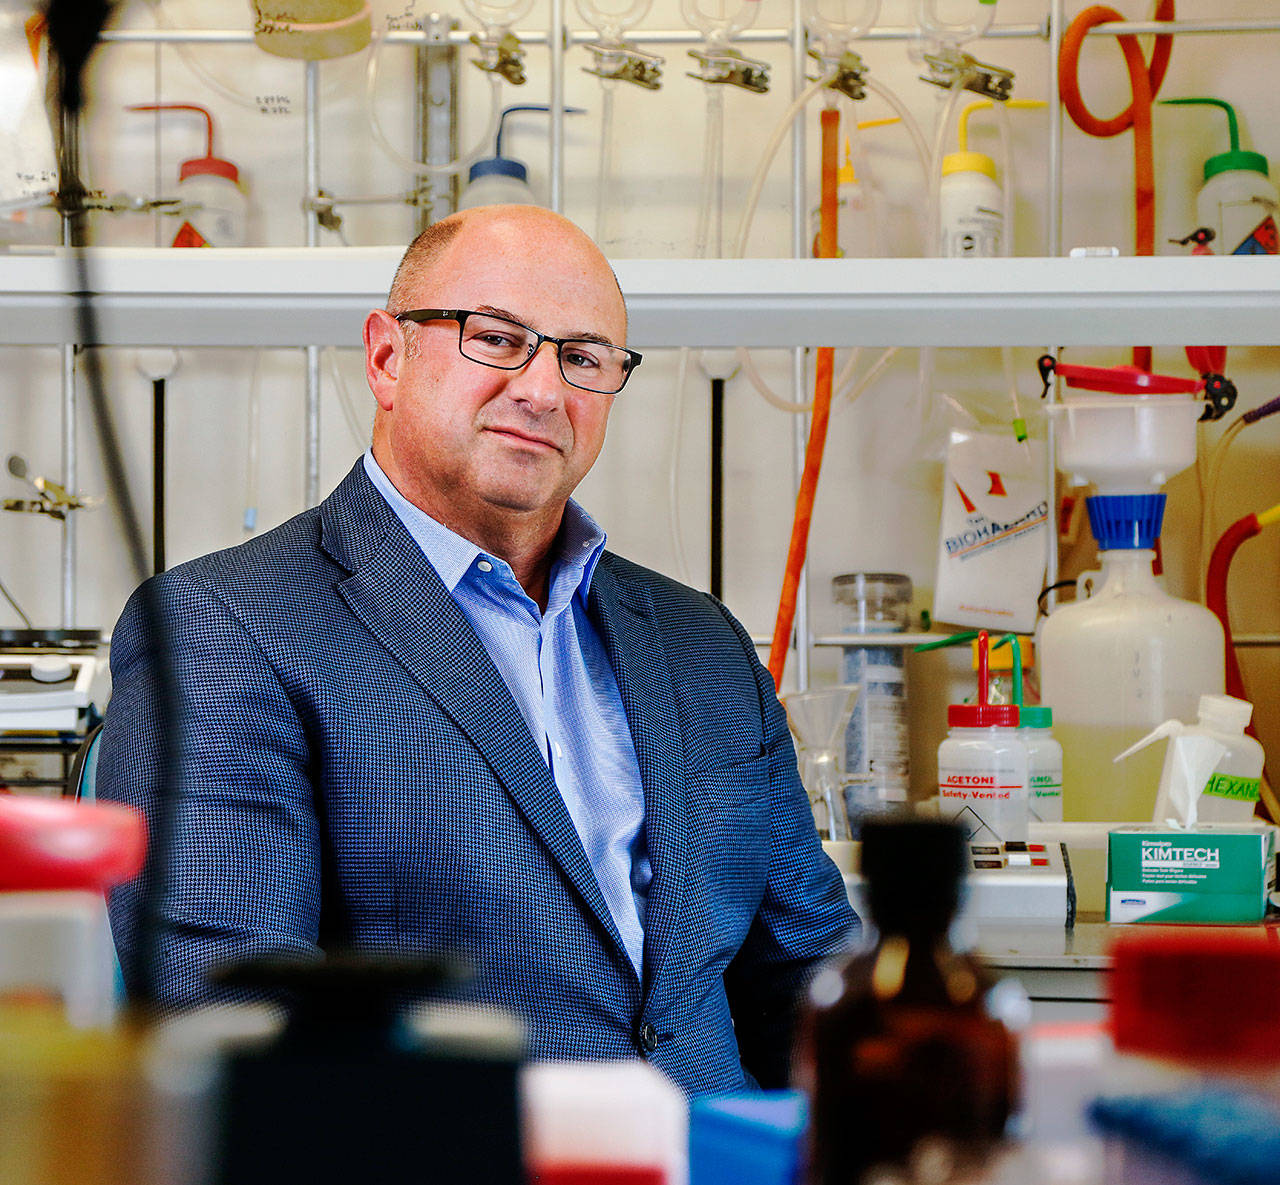 Seattle Genetics CEO Clay Siegall in his company’s Bothell laboratory. A drug developed by his company has now gained approval to be used to treat a rare disfiguring blood cancer of the skin. (File photo)